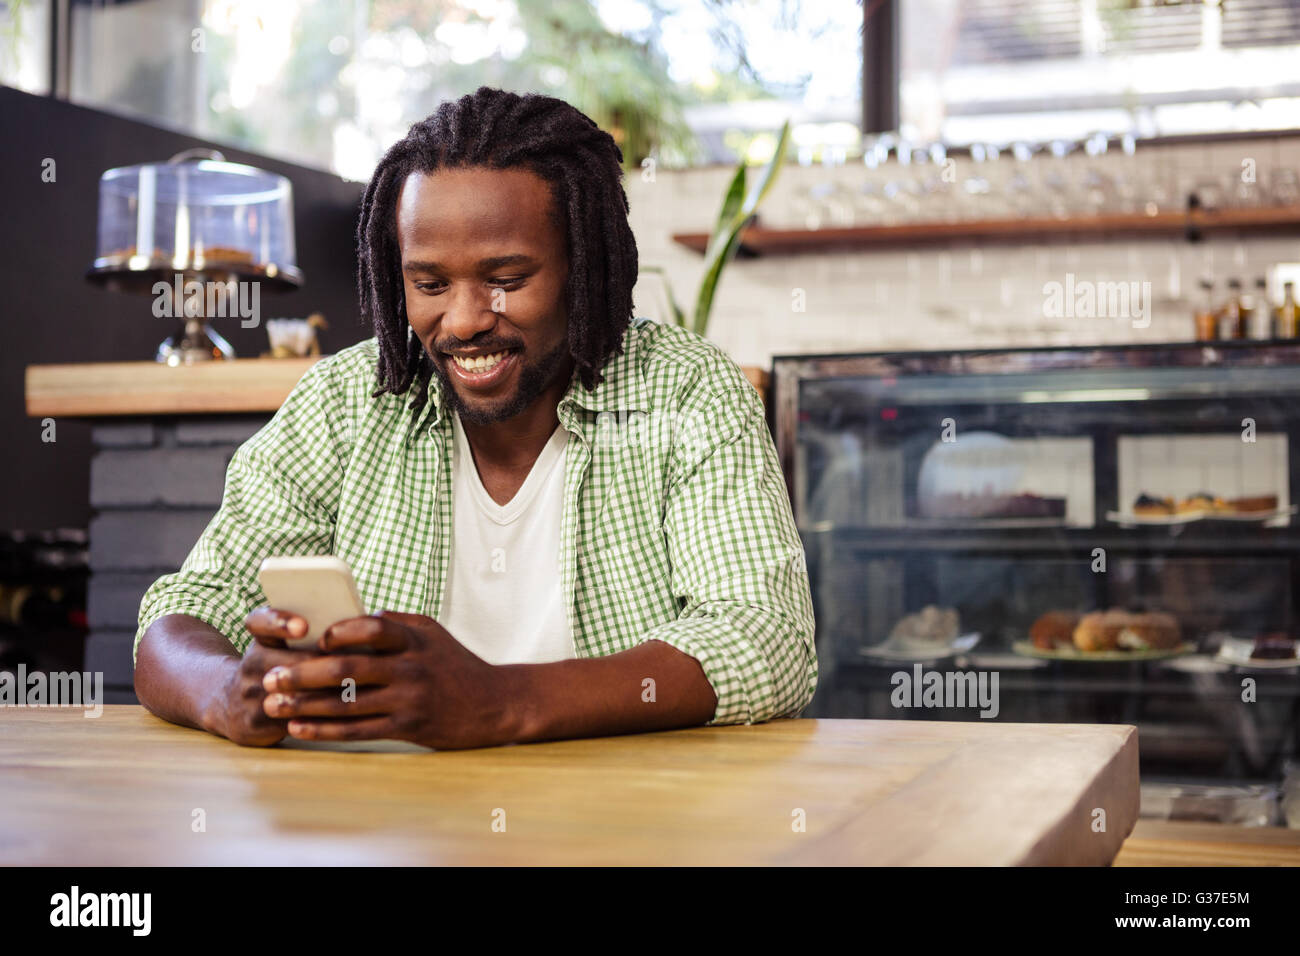 Young man using mobile phone in cafeteria Stock Photo